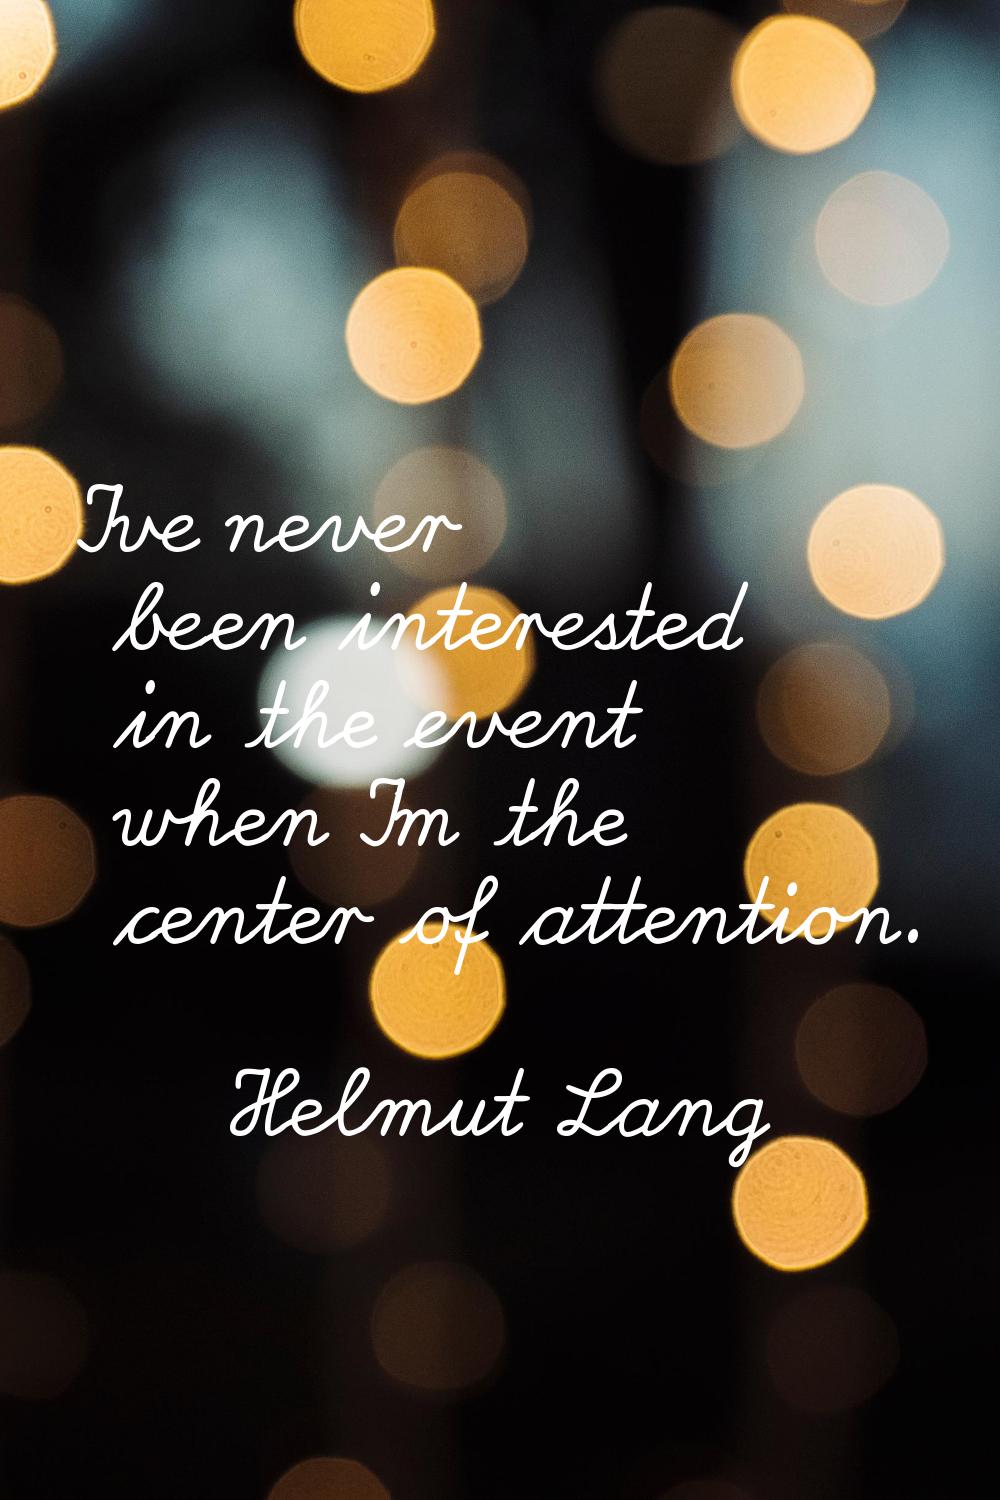 I've never been interested in the event when I'm the center of attention.